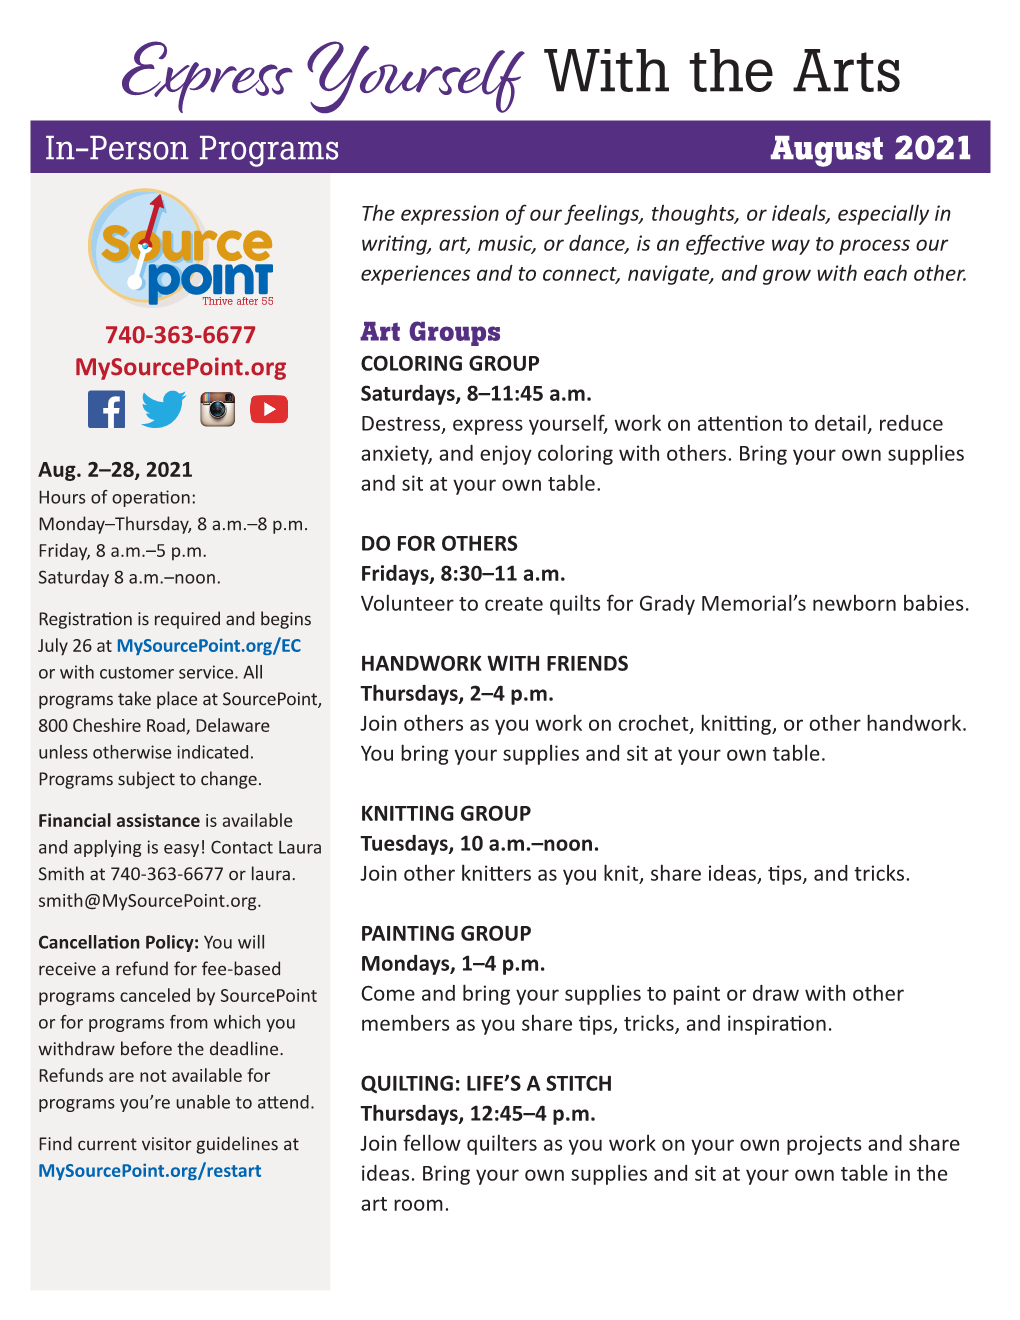 Arts In-Person Programs August 2021